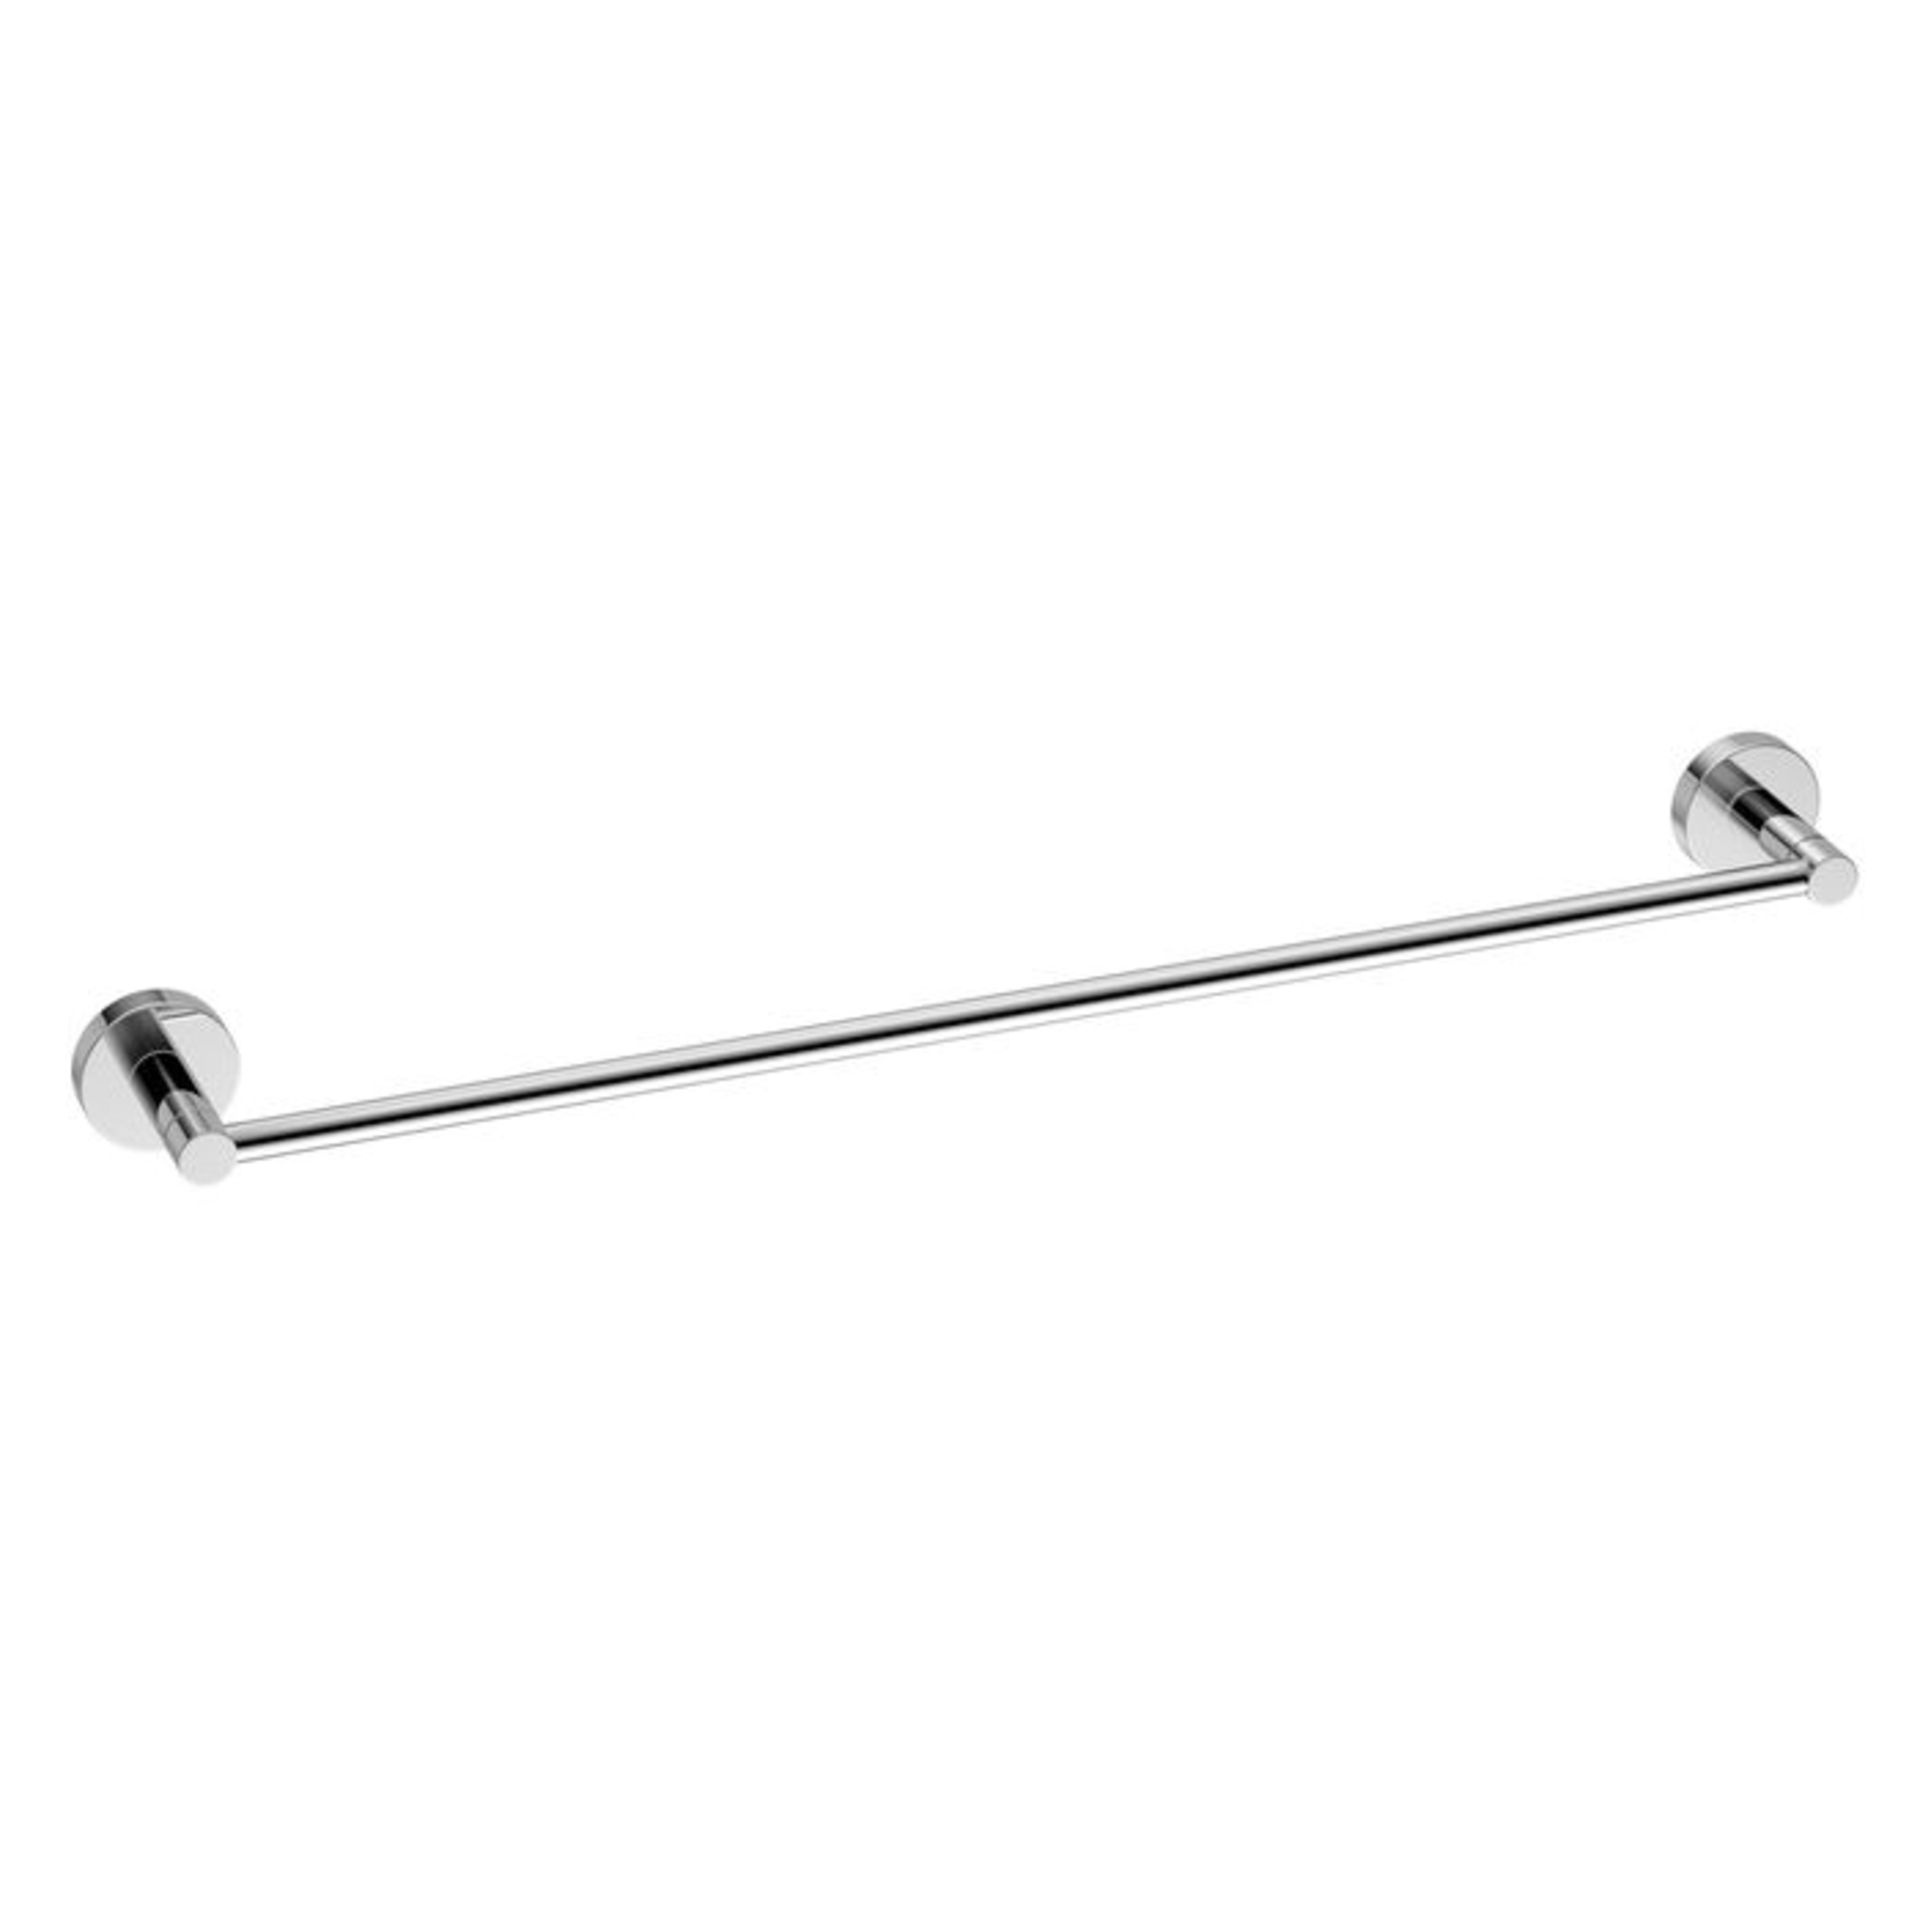 (NF116) Finsbury Towel Rail. Designed to conceal all fittings Completes your bathroom with a